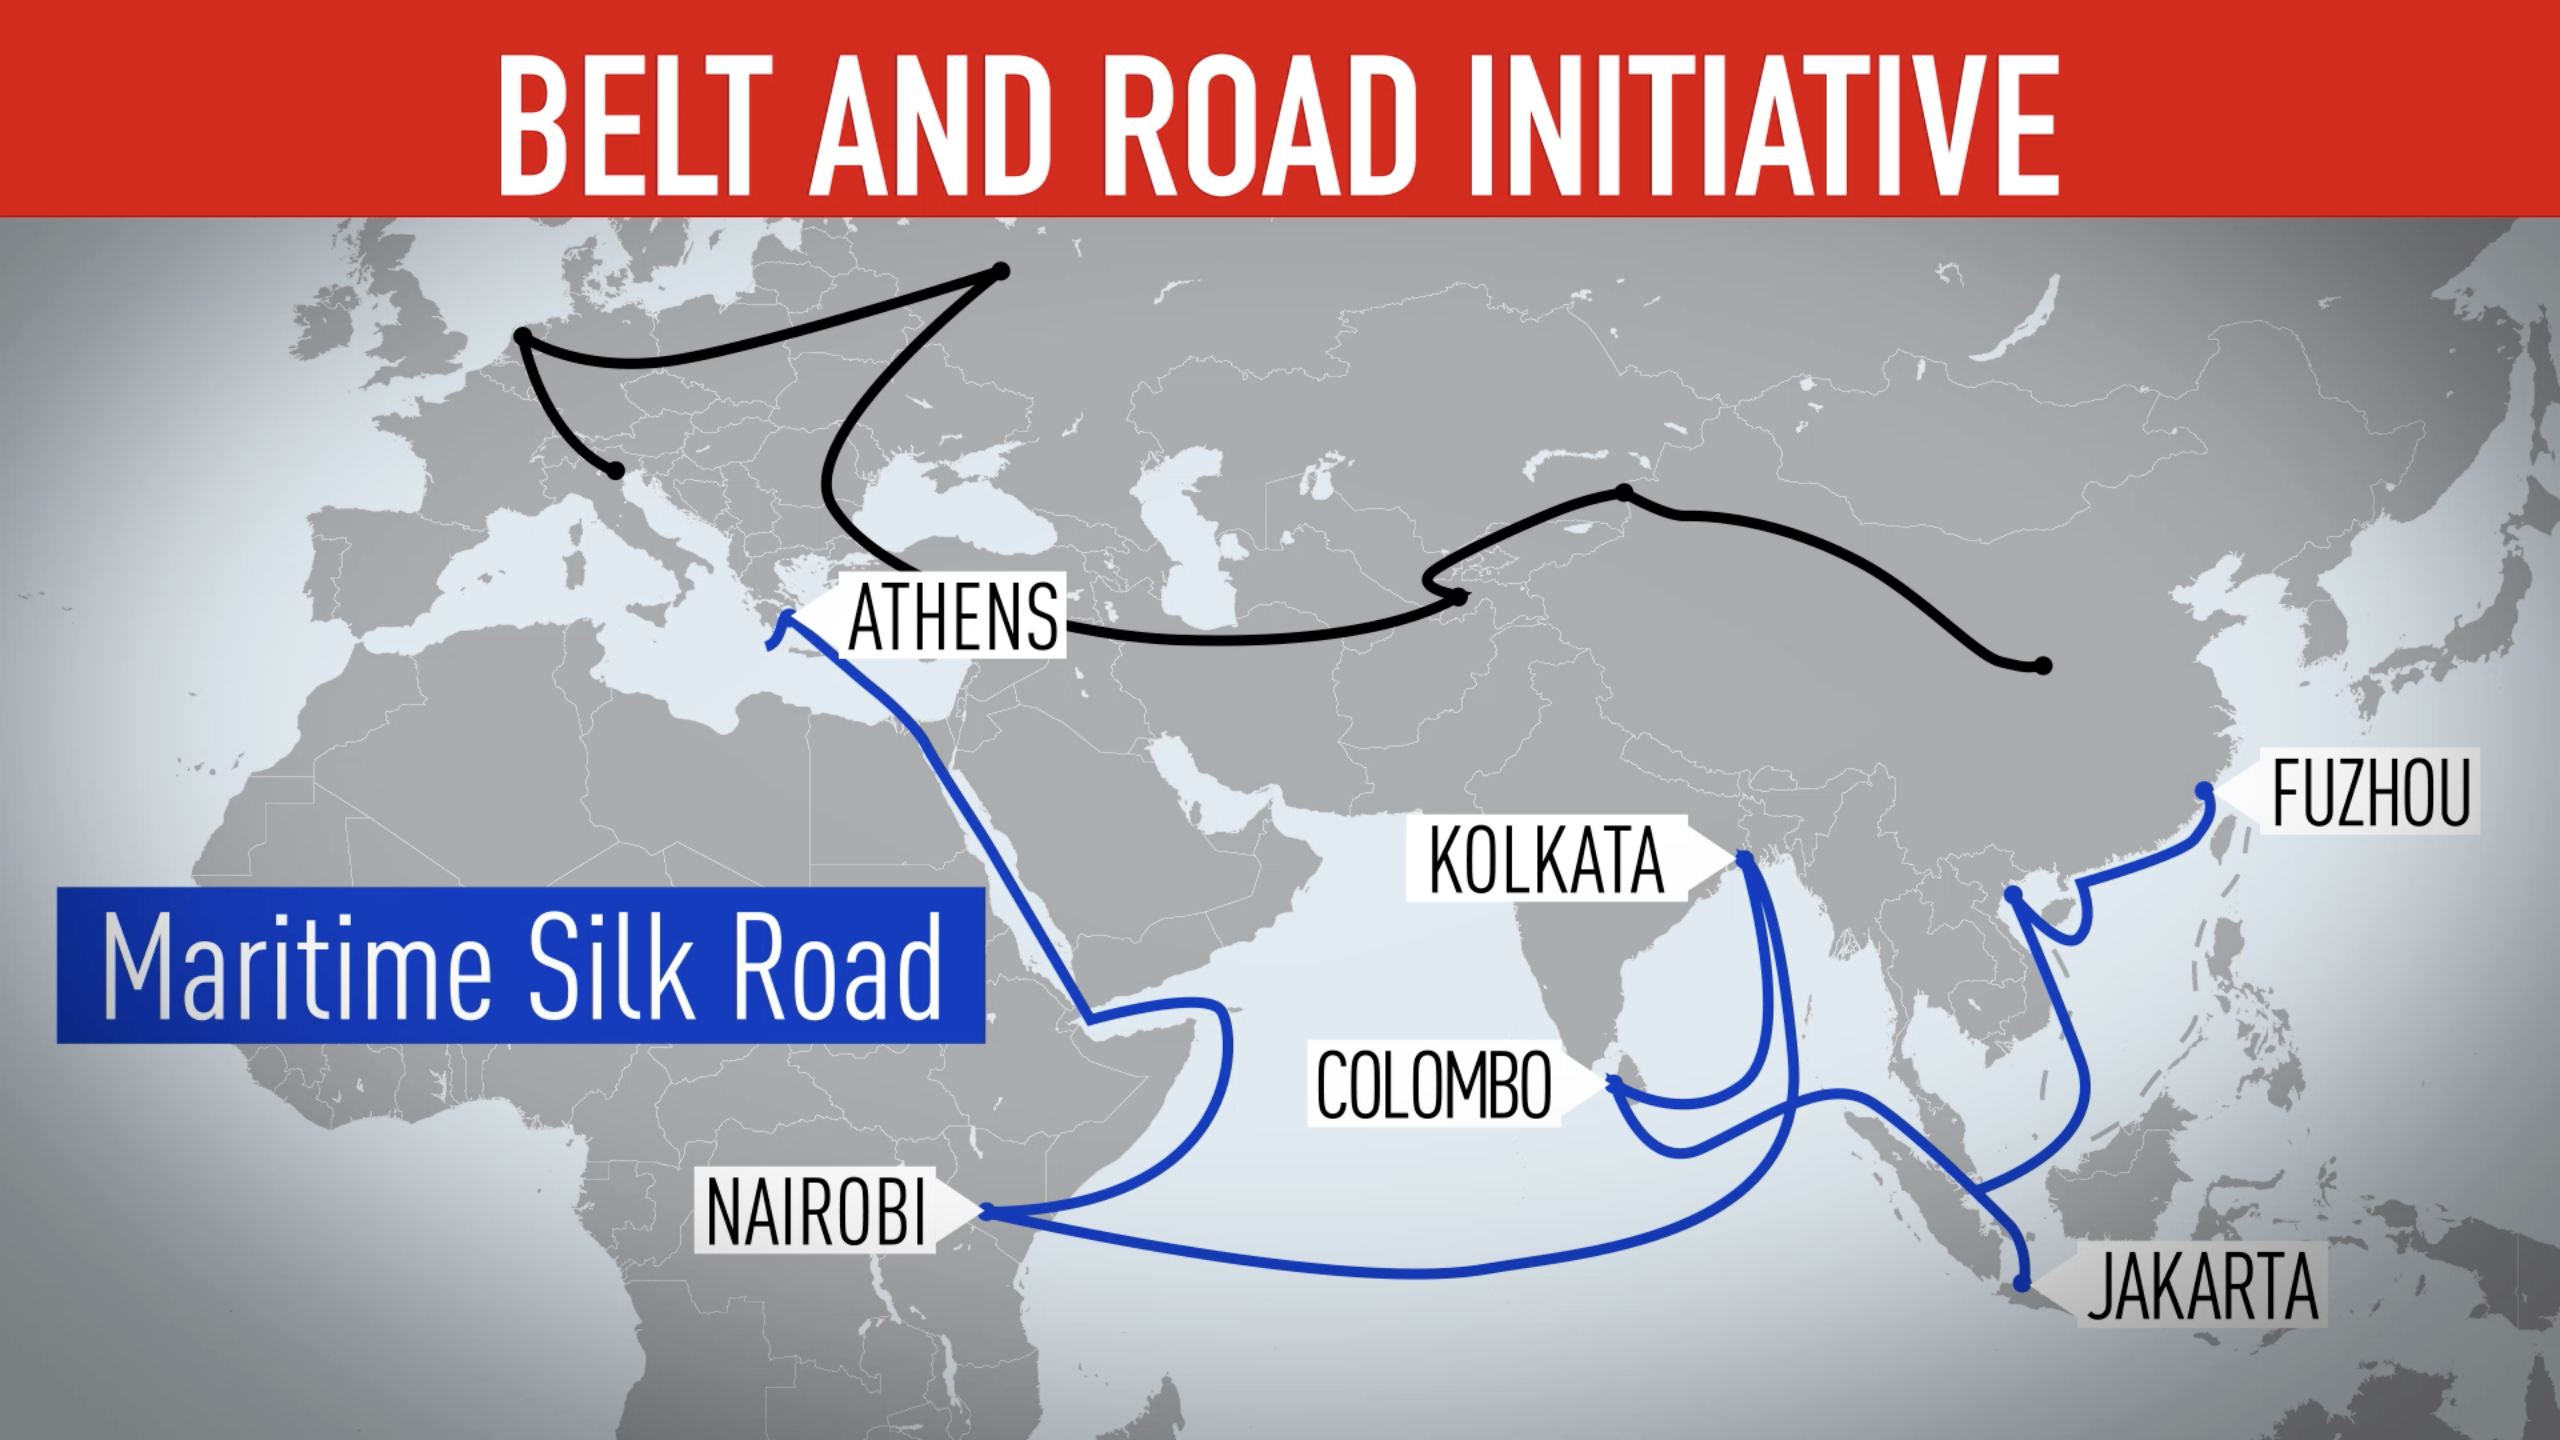 The Maritime Silk Road consists of shipping lanes connecting ports, reaching all the way to the Mediterranean and Africa. /CGTN